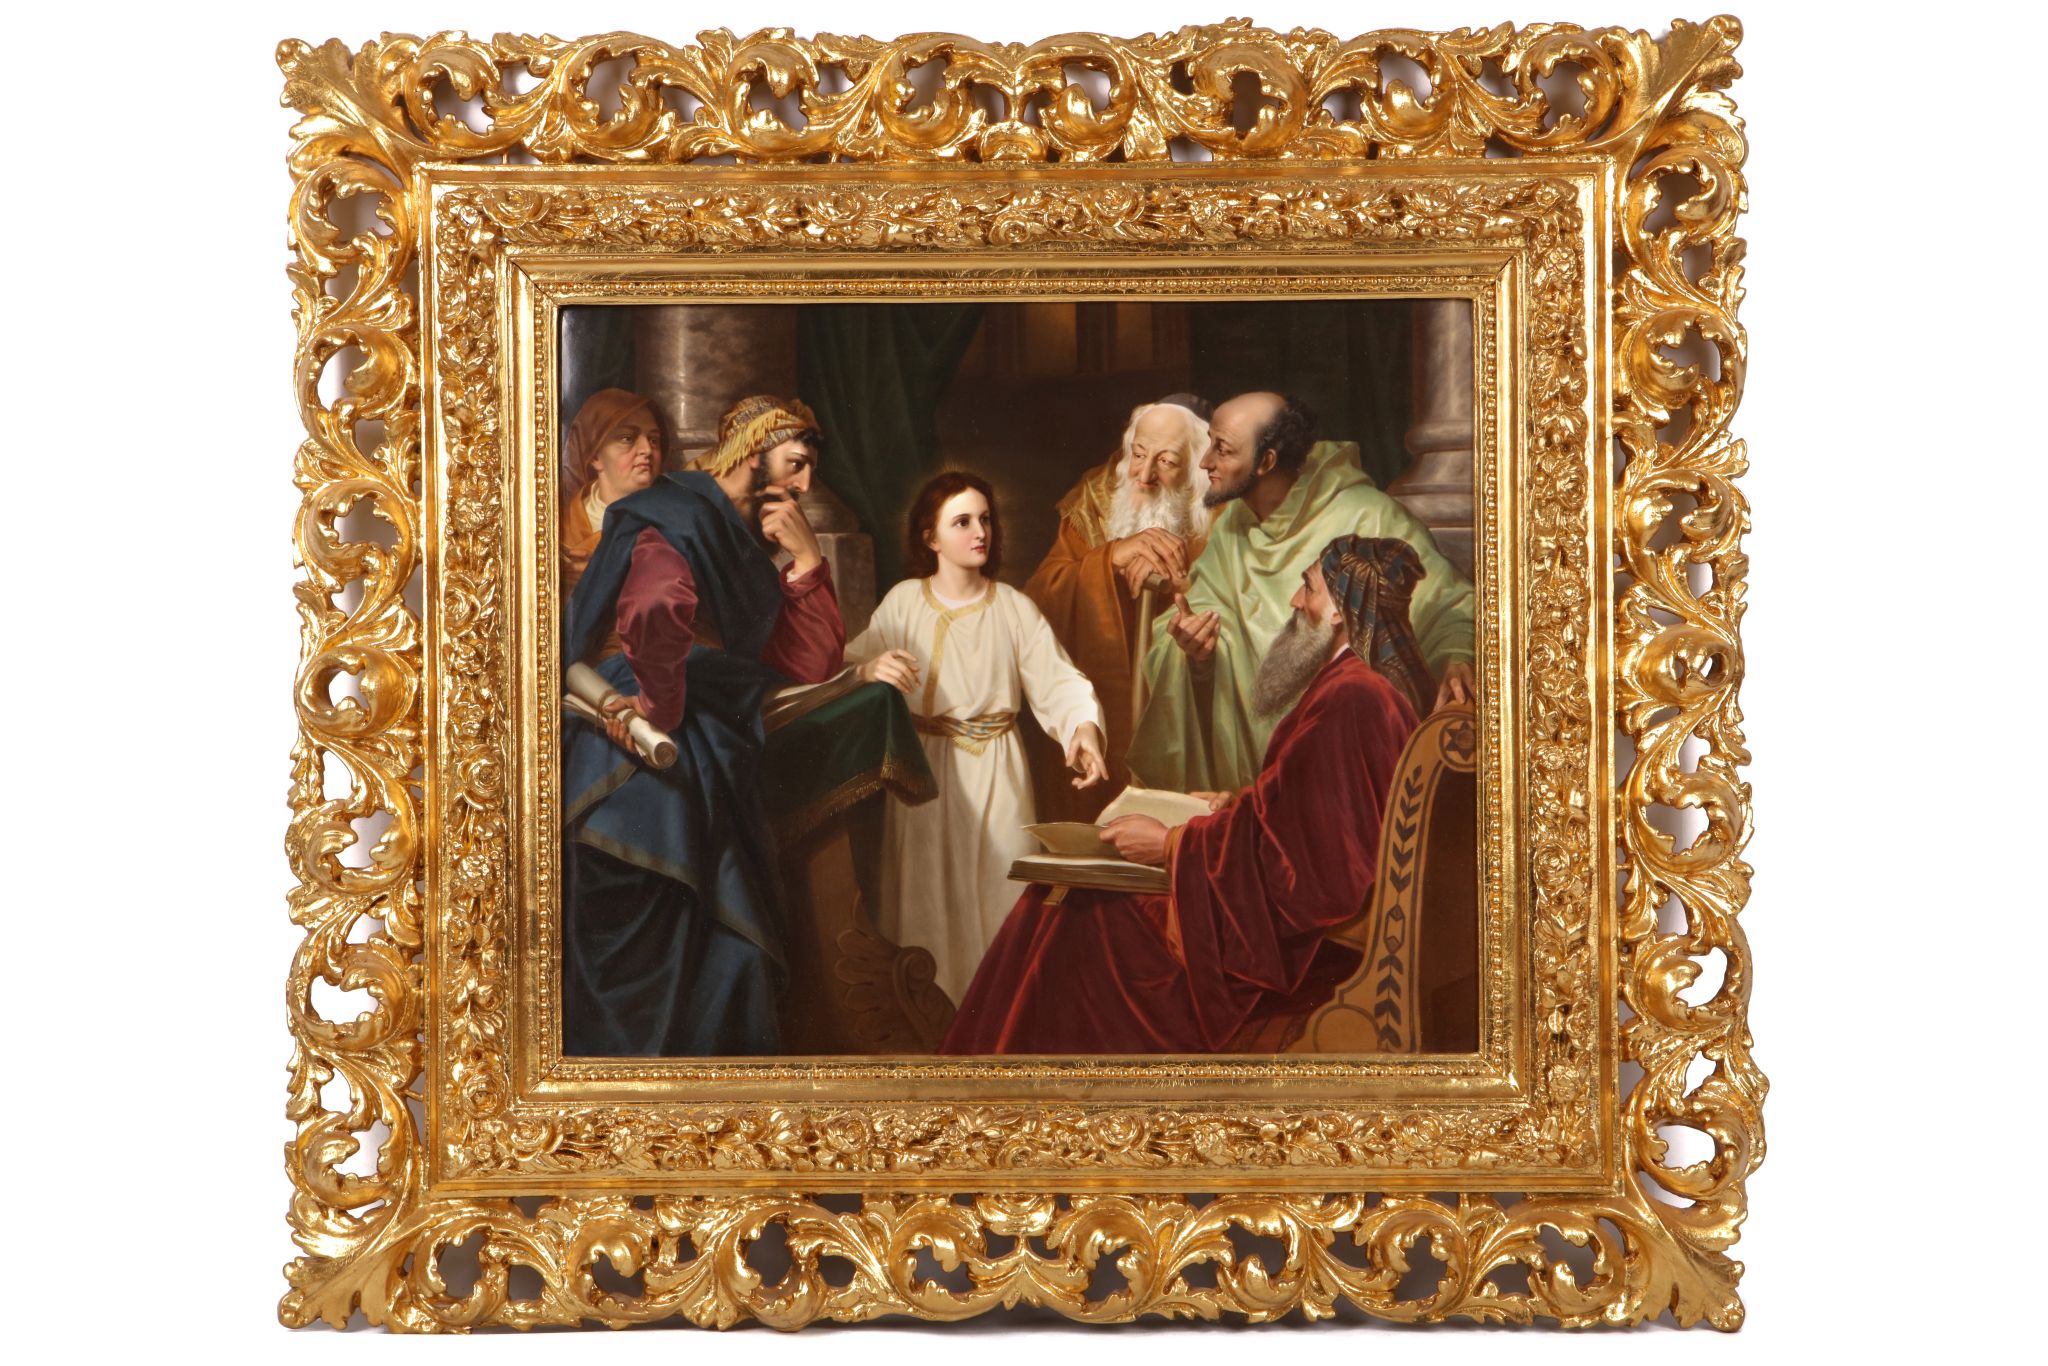 A VERY LARGE LATE 19TH CENTURY BERLIN KPM PORCELAIN PLAQUE DEPICTING CHRIST WITH THE ELDERS IN THE